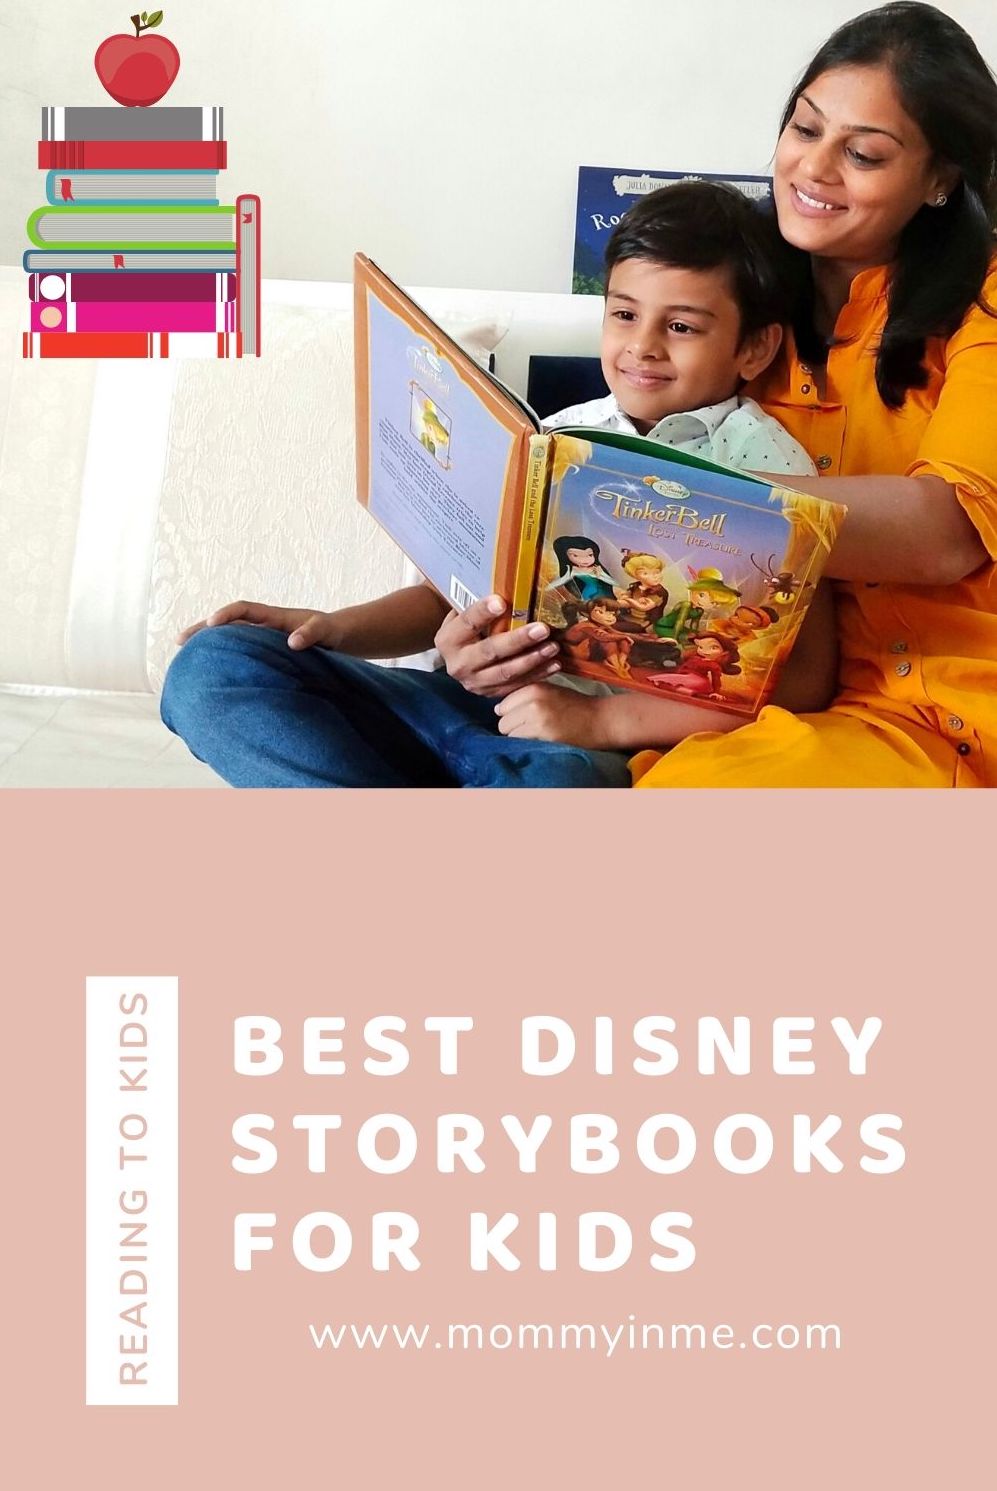 If you're a disney lover, you ought to love their storybooks too. Here is a list of 6 new releases and are the Best Disney storybooks for 2019-2020 till now. #Disney #disneybooks #disneystorybooks #storybooks #toystory #frozen2 #disneypixar